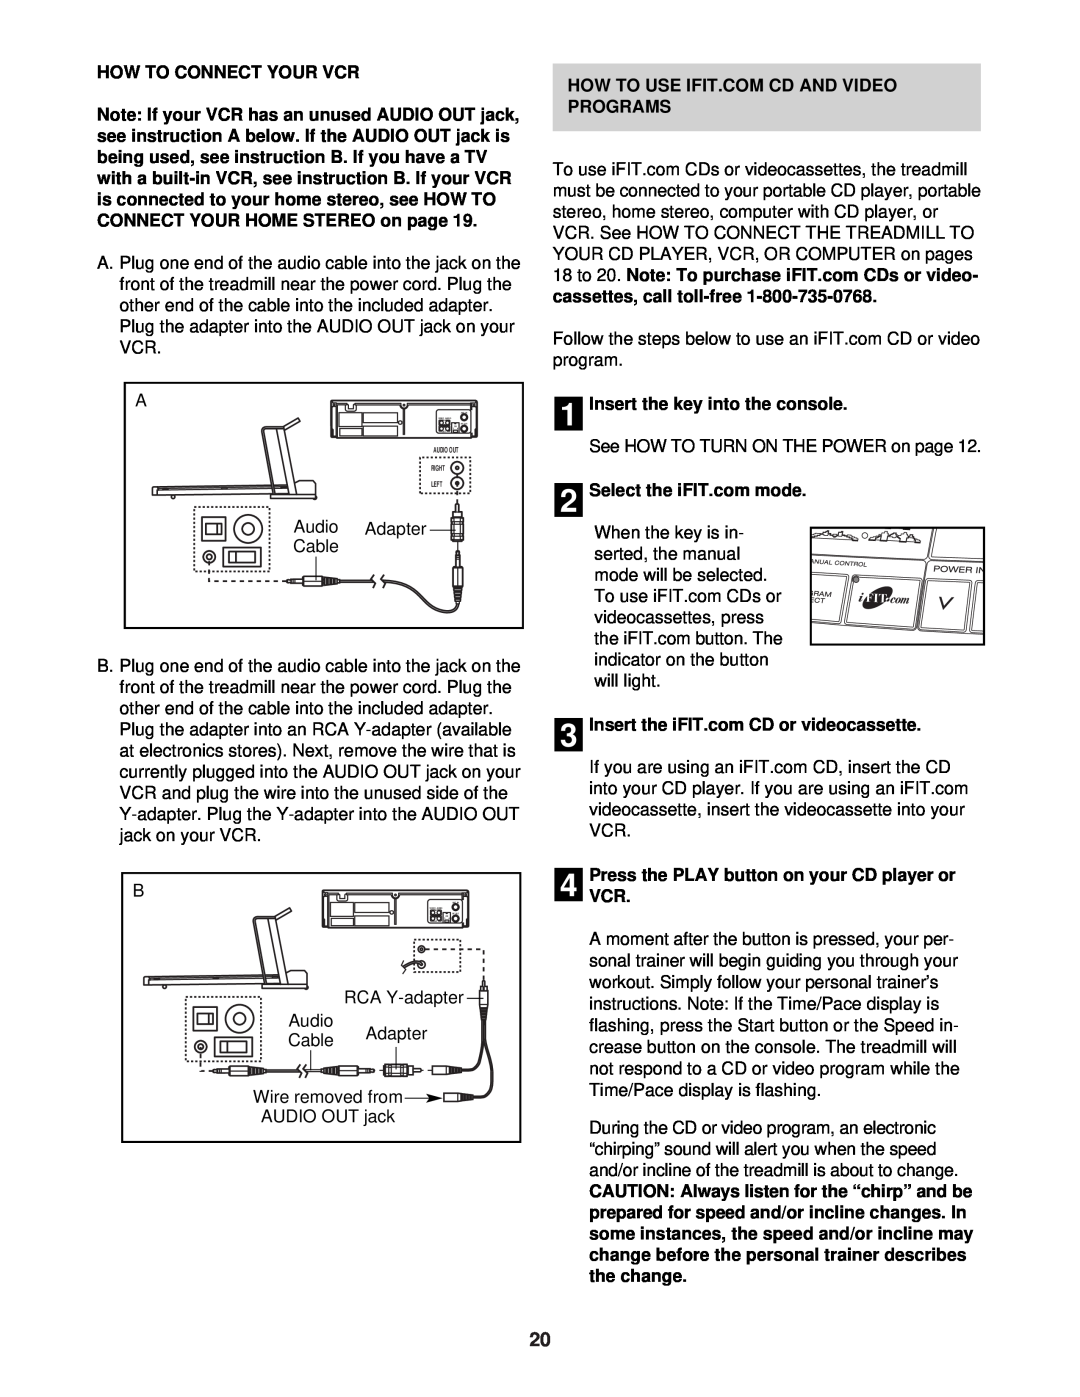 ProForm DTL62940 How To Connect Your Vcr, How To Use Ifit.Com Cd And Video Programs, Insert the key into the console 